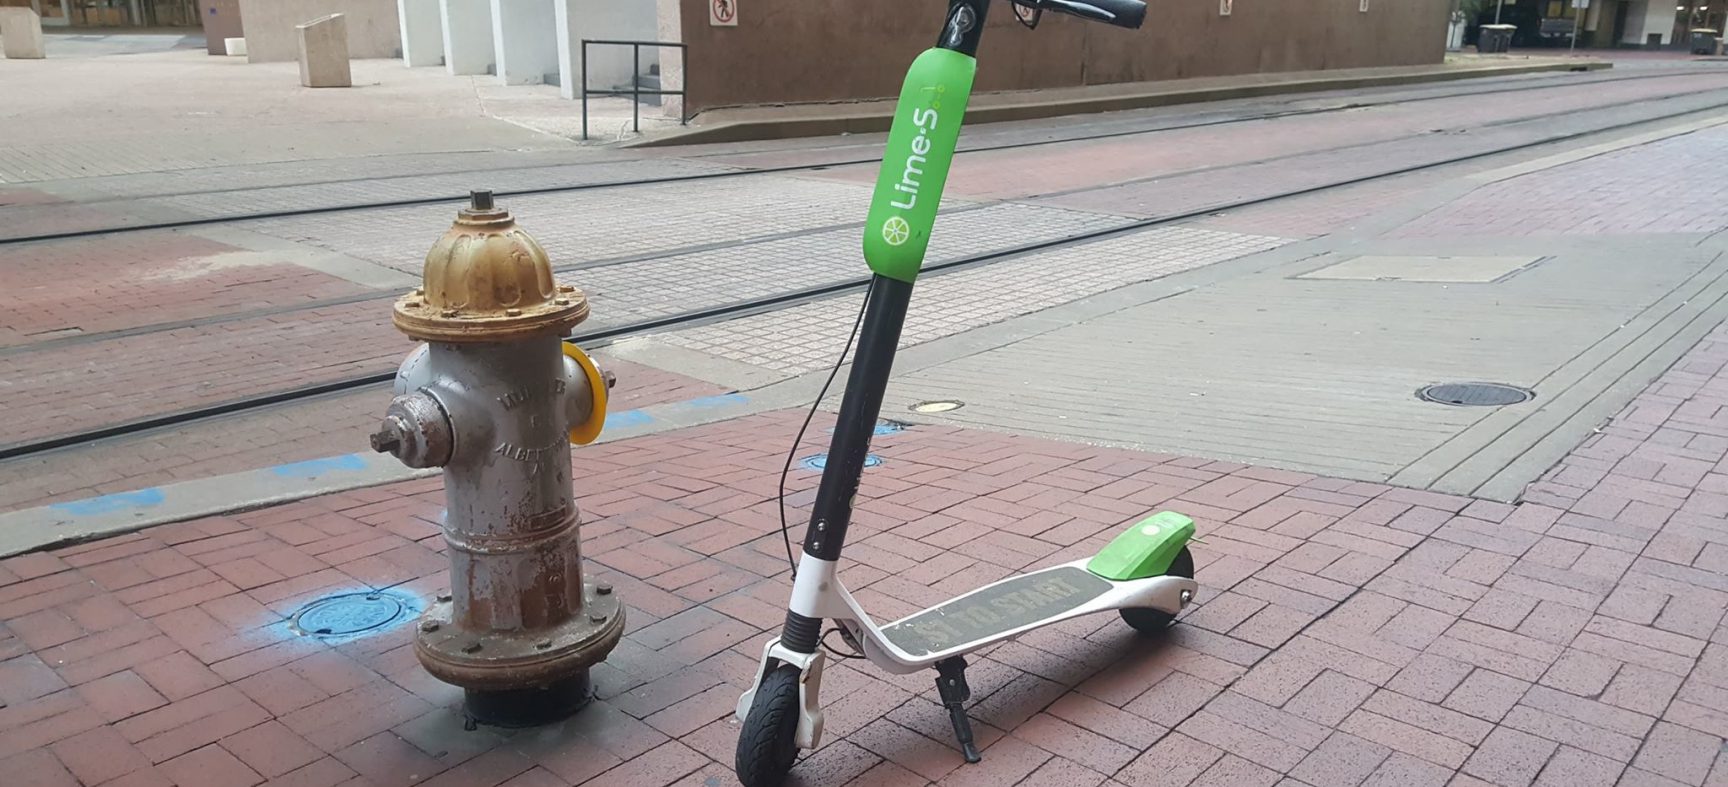 Electric scooters in Dallas: what you need to know